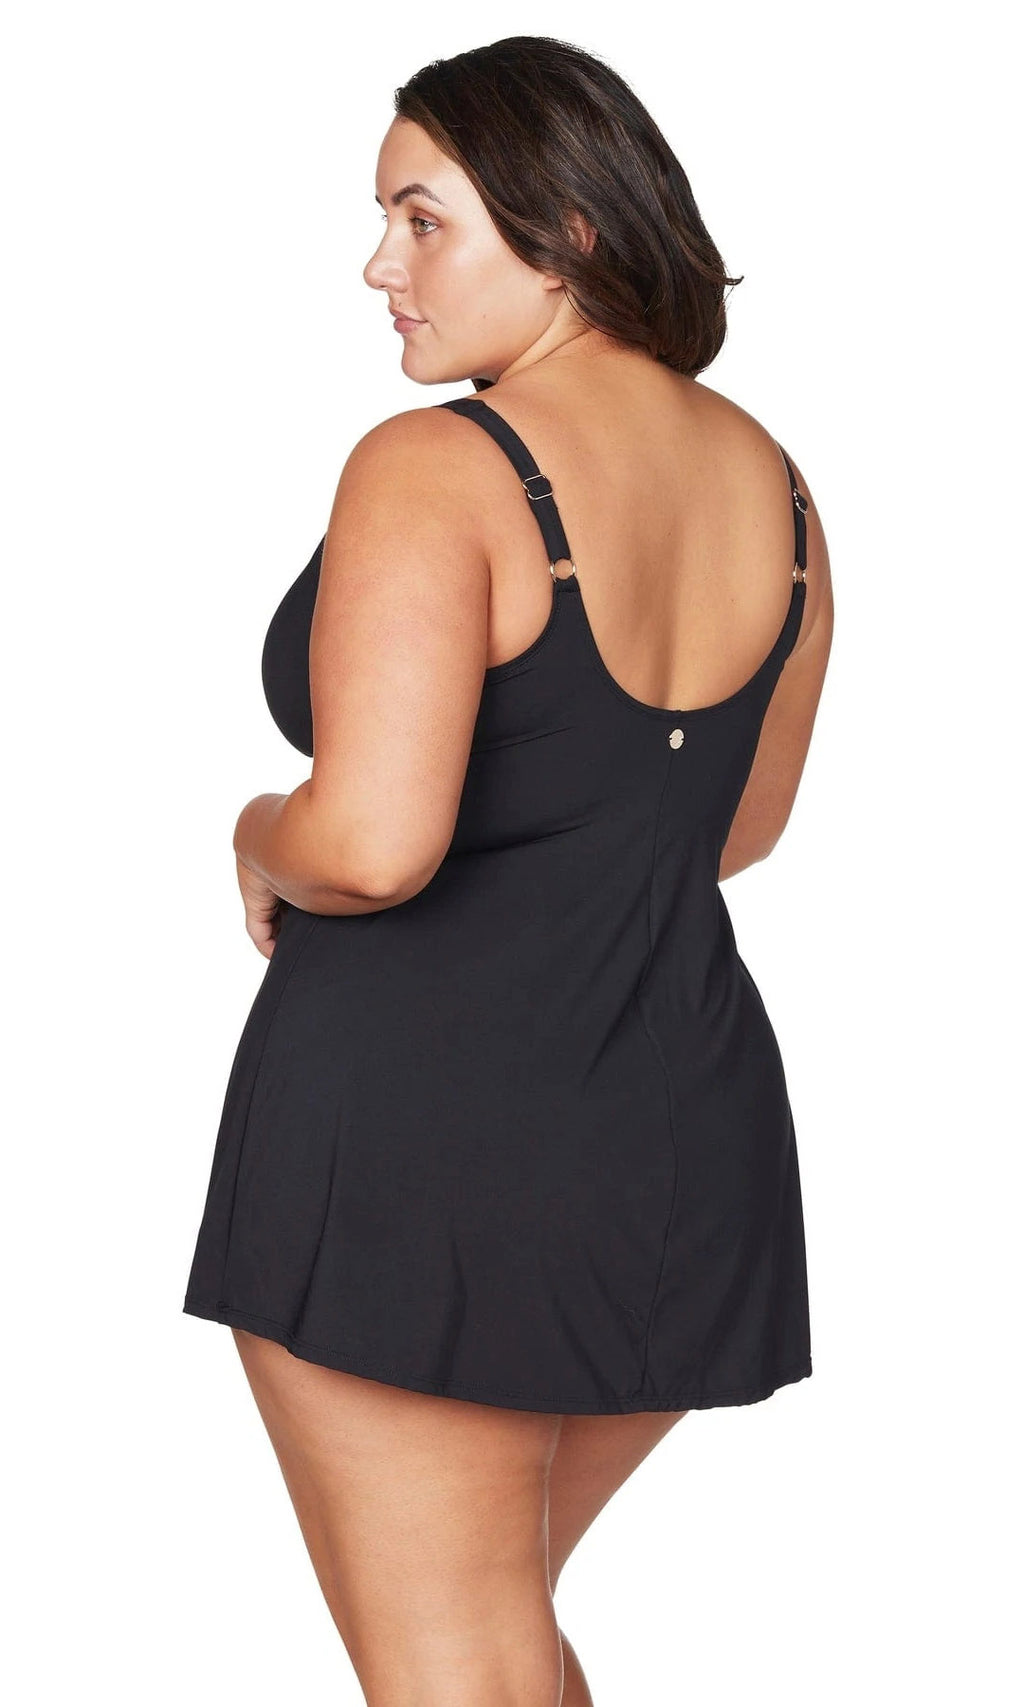 Swimdress Recycled Hues Black Delacroix, Multifit D Cup to G Cup